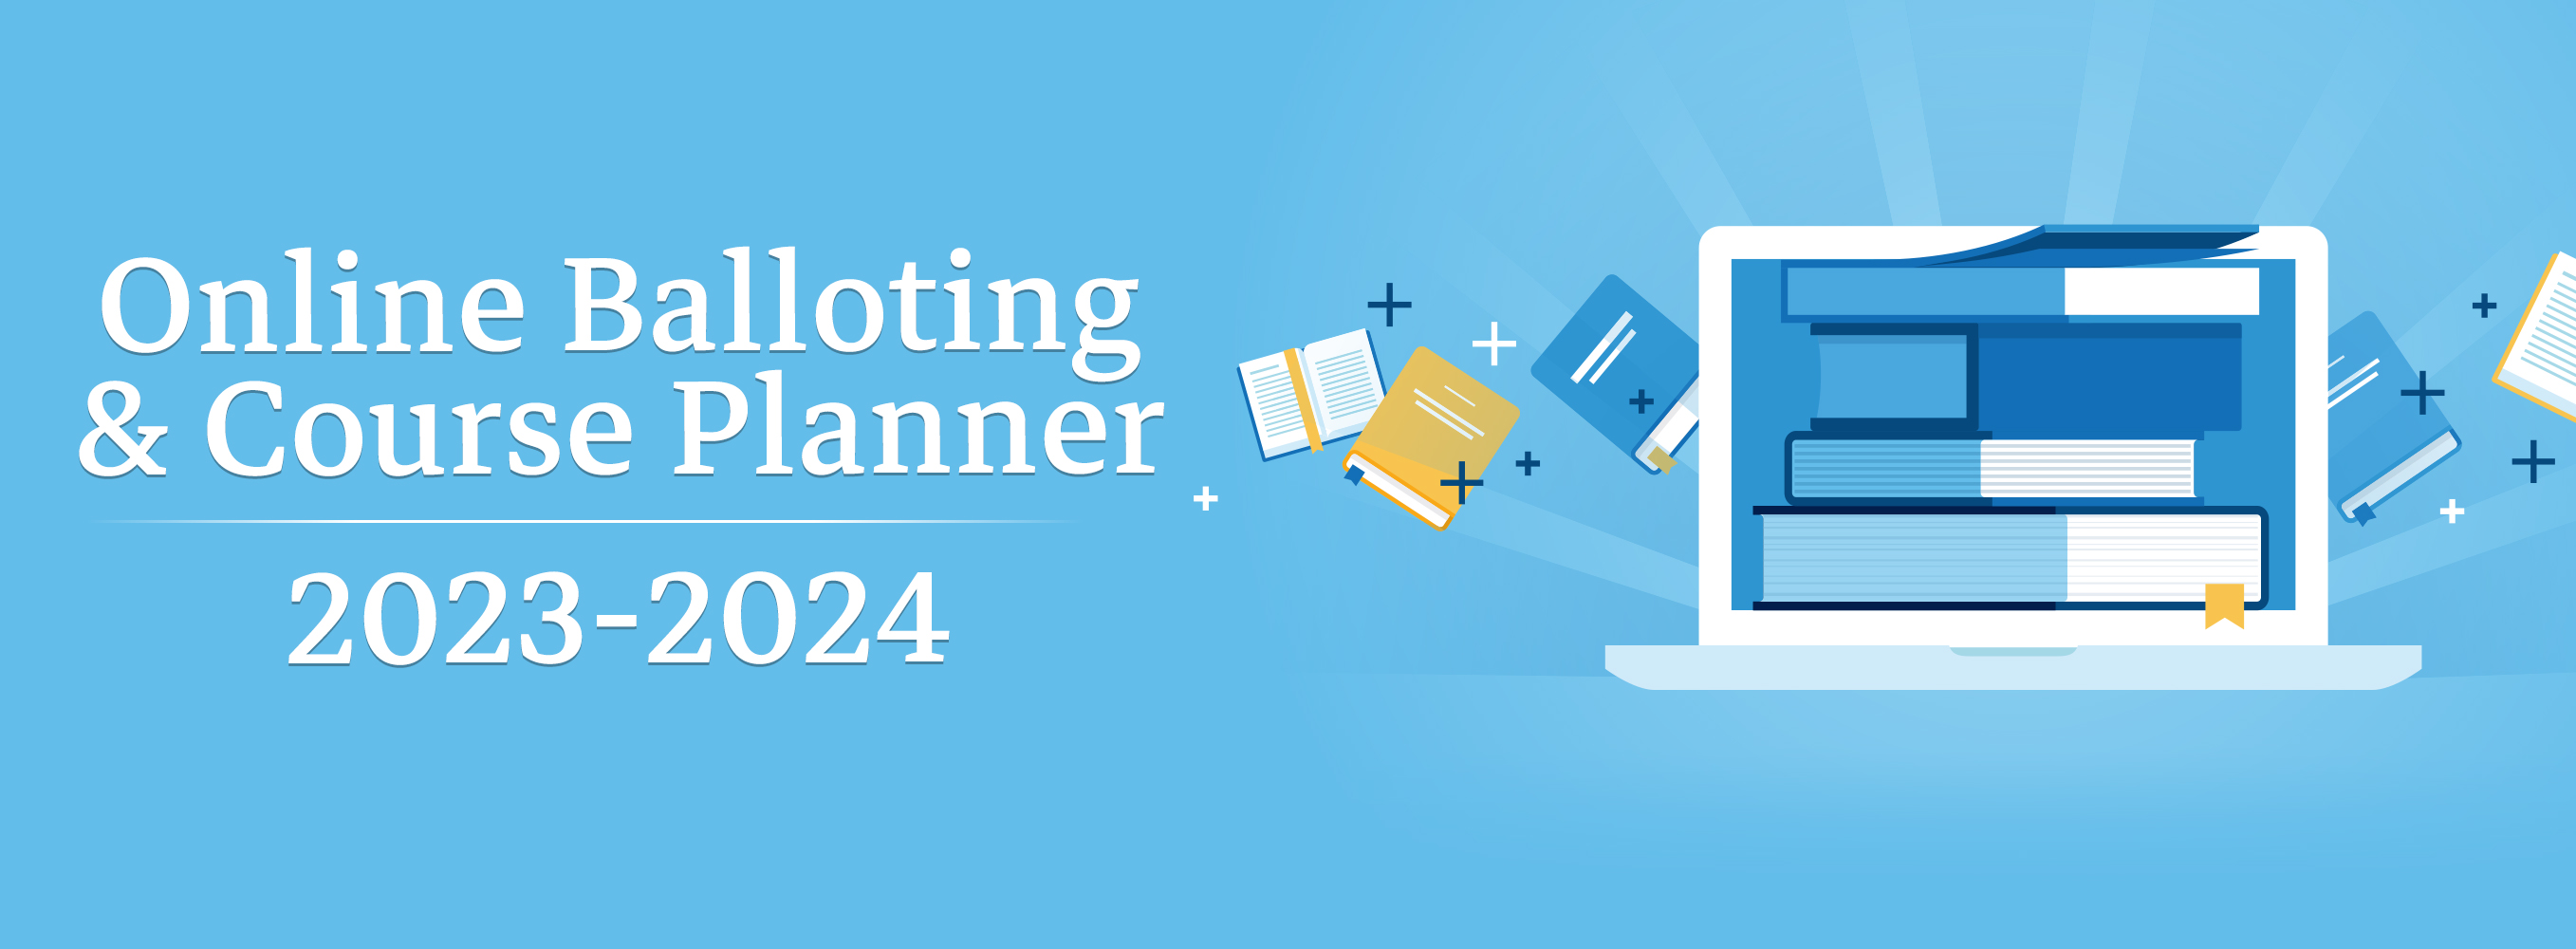 Online Balloting for 2023-2024 - Course Planner gallery banner